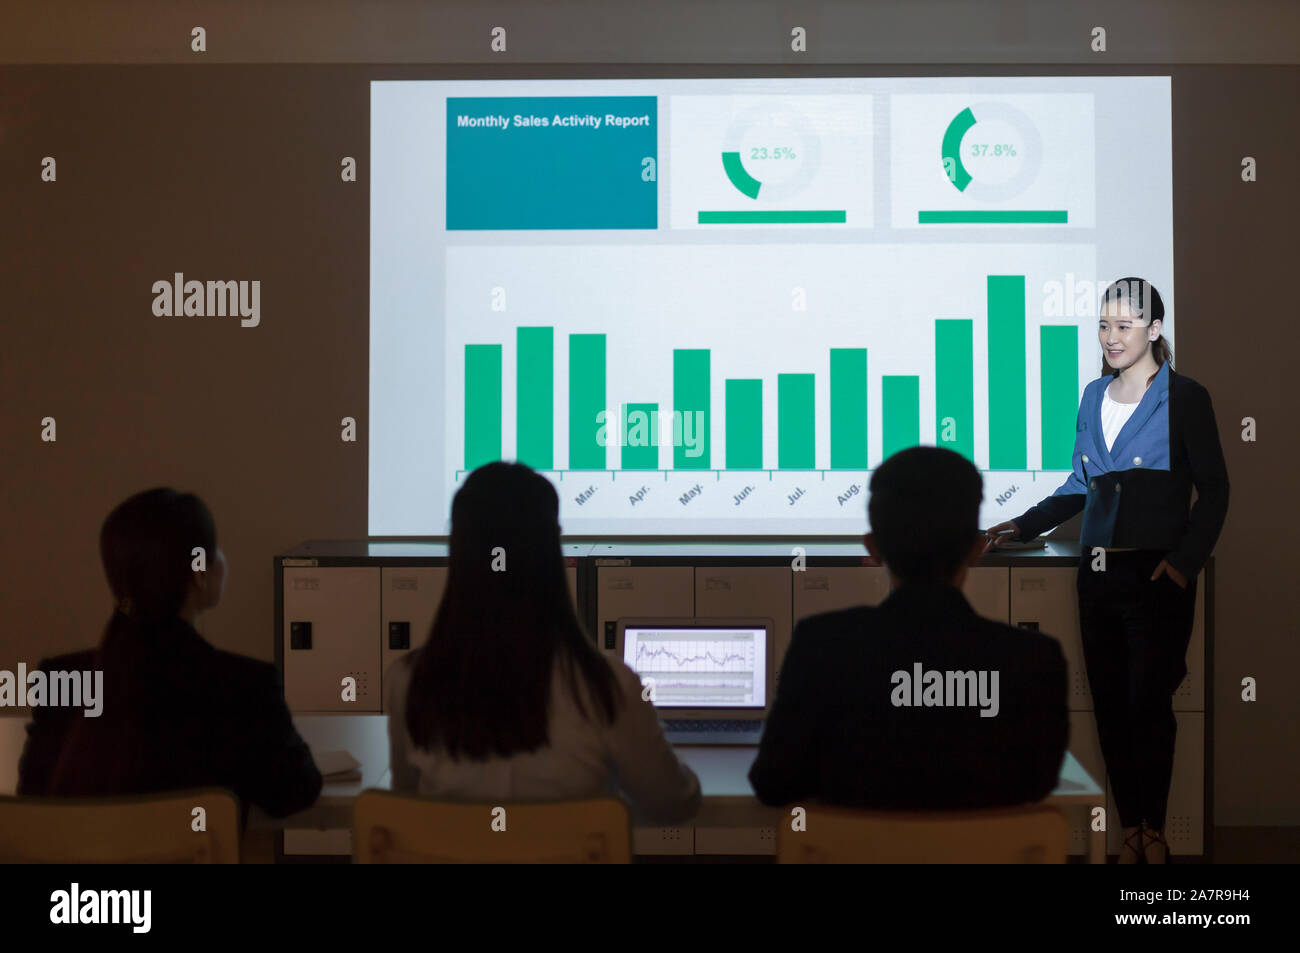 Photograph of a young businesswoman in businesswear giving a presentation with a chart on the screen behind her Stock Photo